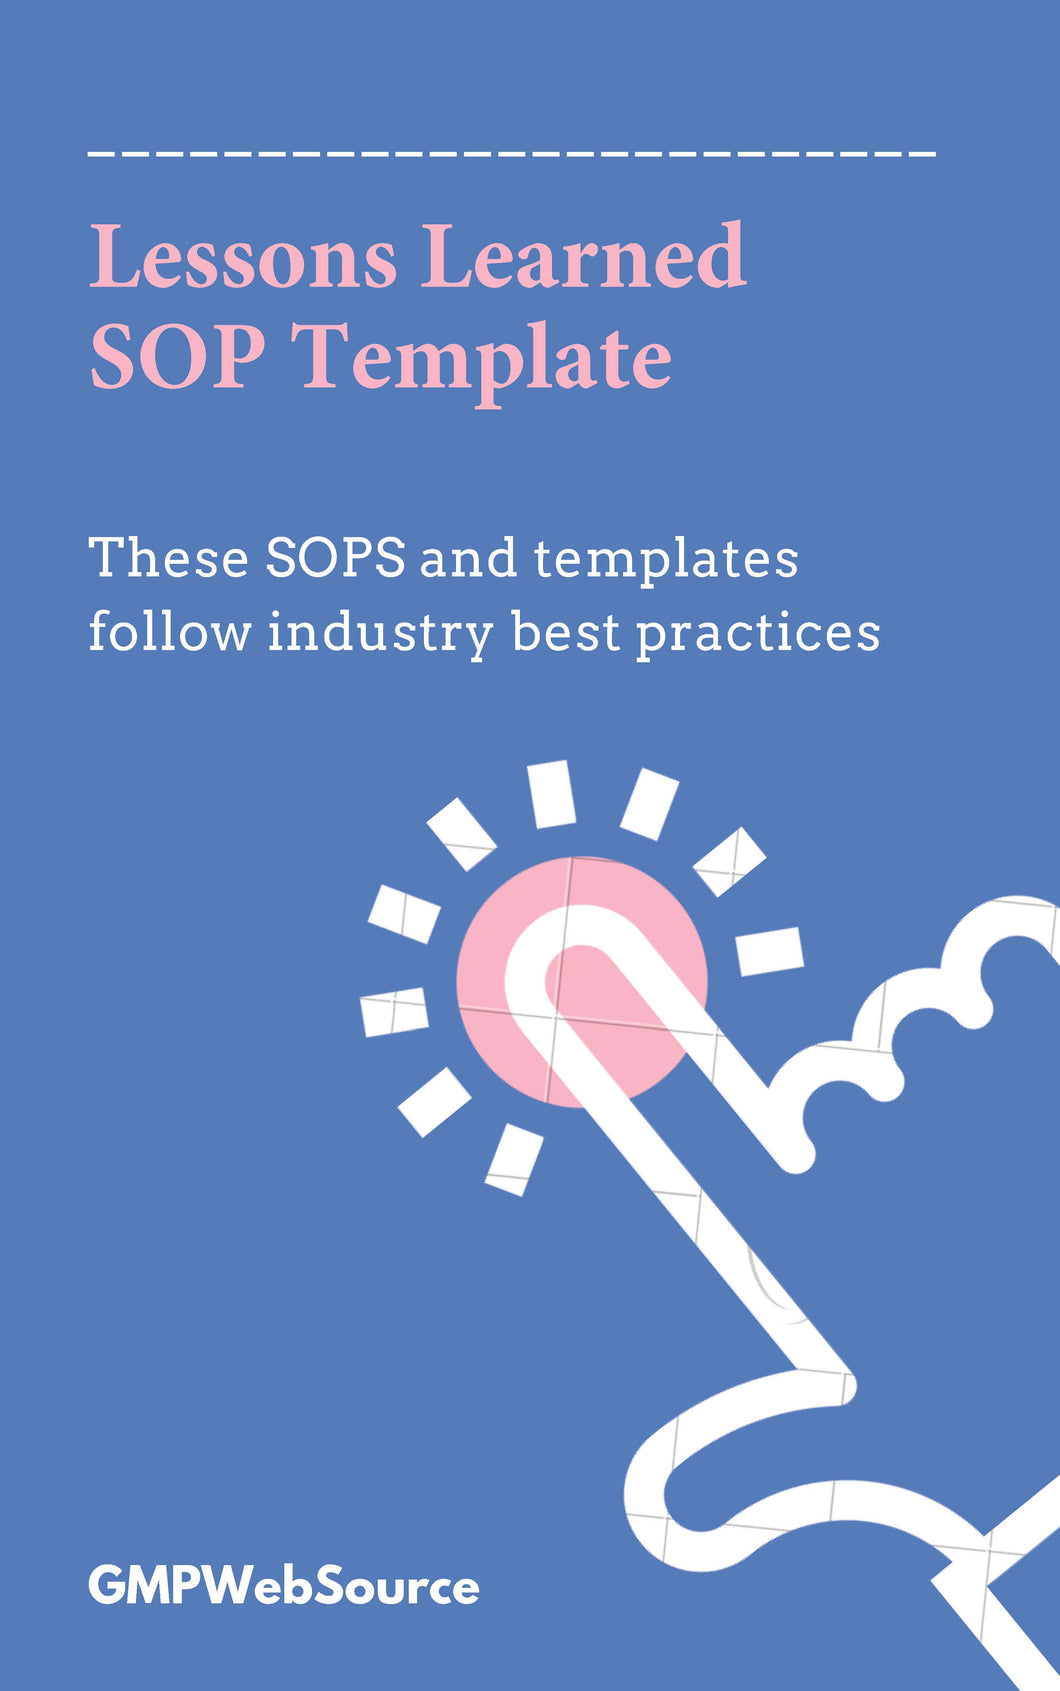 Lessons Learned SOP Template